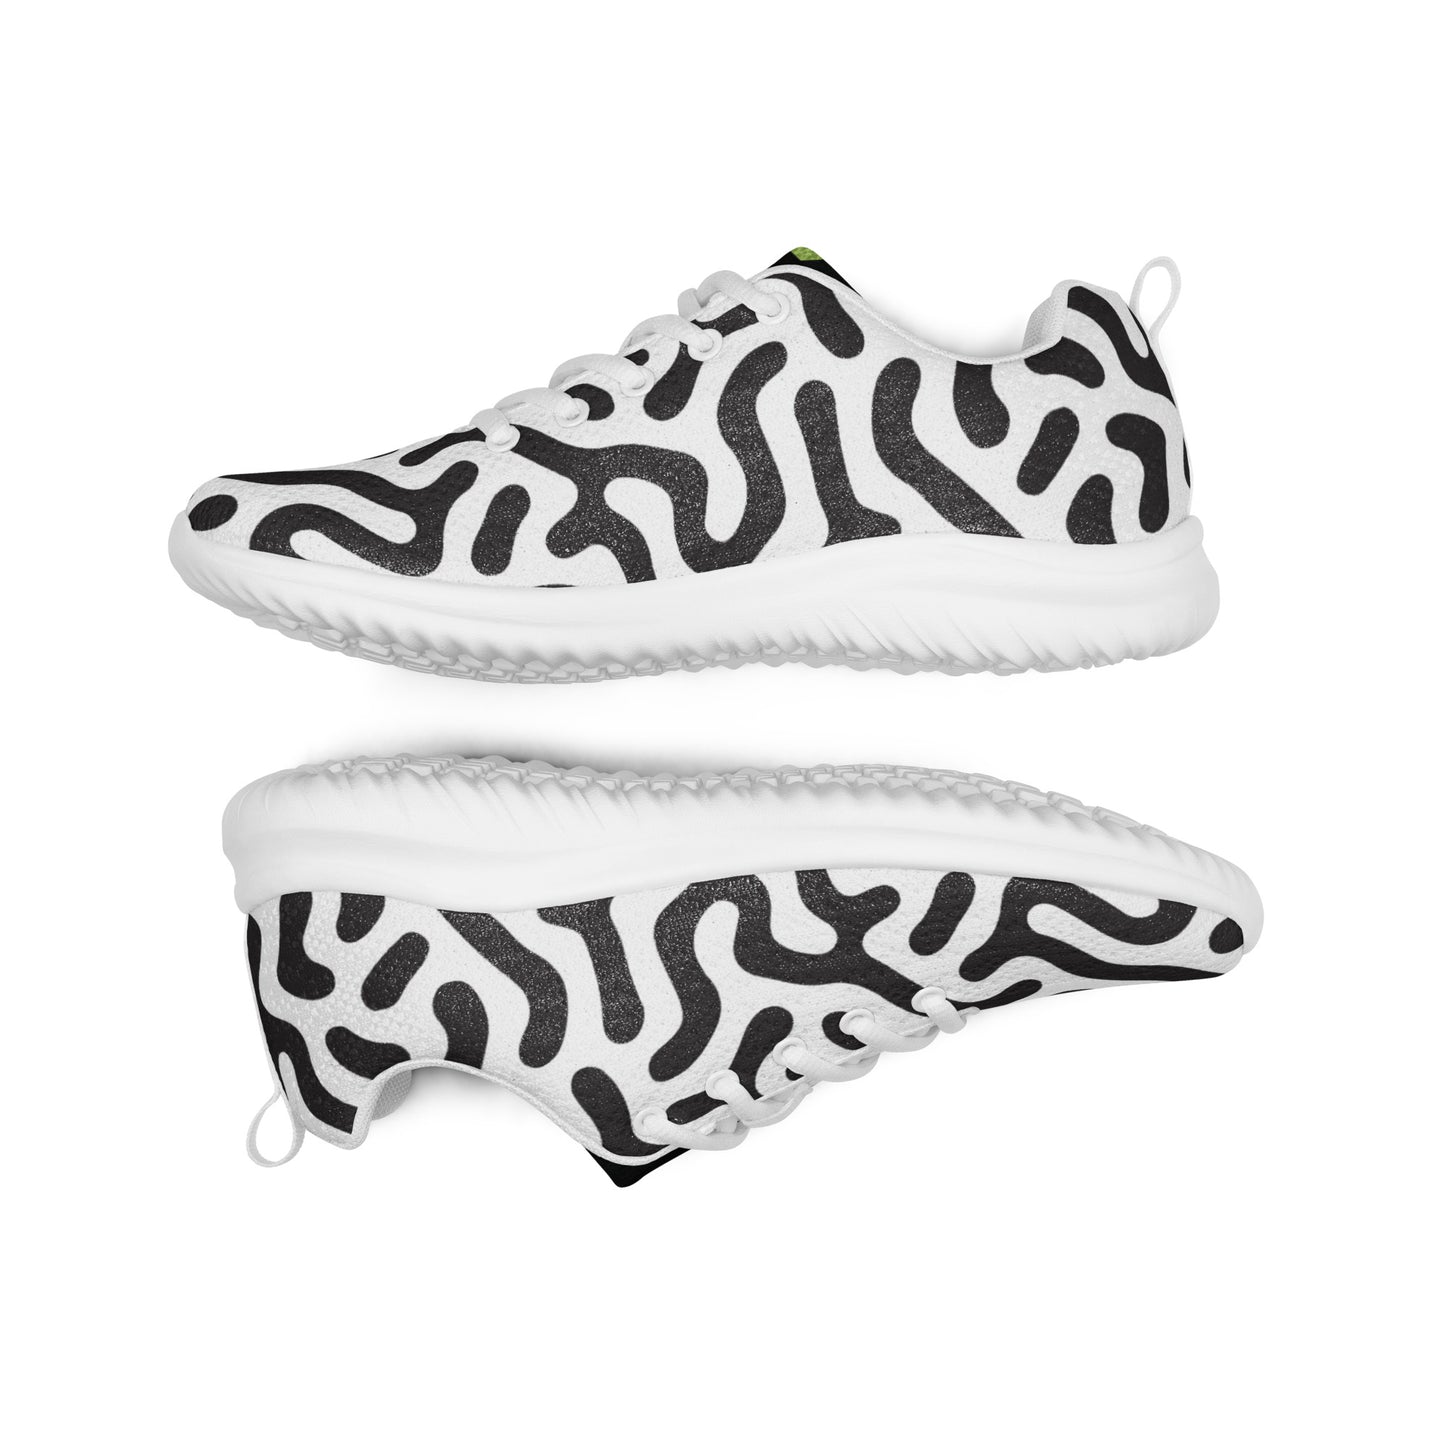 Women’s athletic shoes zebra green tiger